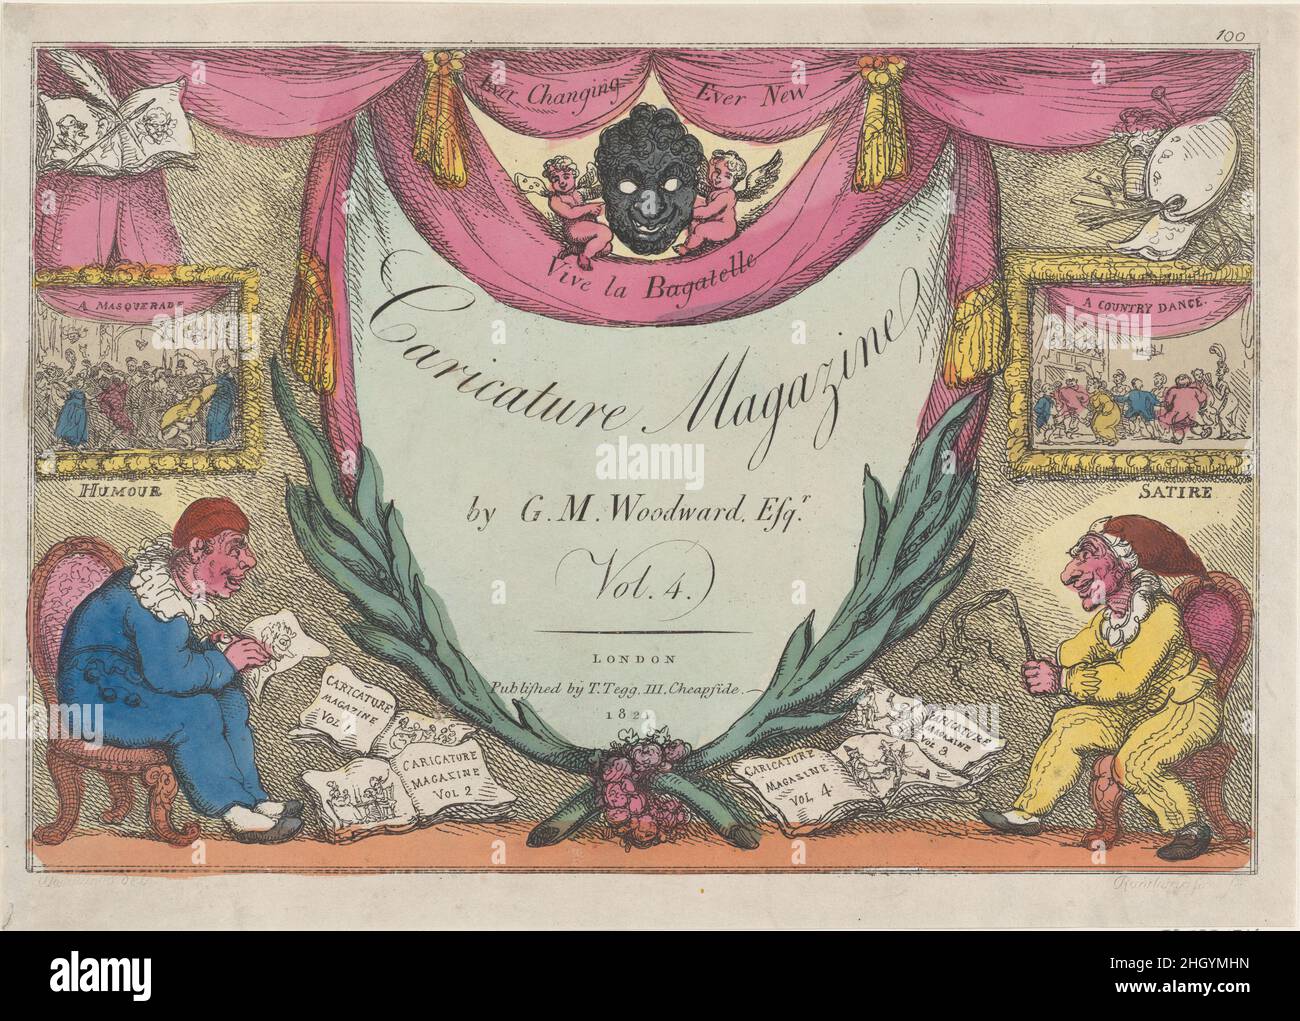 Title Page, The Caricature Magazine by G. M. Woodward, vol. 4 1821 Thomas Rowlandson Tegg's 'Caricature Magazine' first appeared in 1807 and each issue was given a different title page. This example reused a plate created in 1809, altered the text and the hand coloring (see 59.533.1224 for the earlier version). Two figures below may represent the artist Woodward and Tegg, with the man at left sketching a caricature and sitting below a framed image of a Masquerade and the word Humour; that at right holding a whip and sitting beneath a picture of a Country Dance and the word Satire. Laurels fram Stock Photo